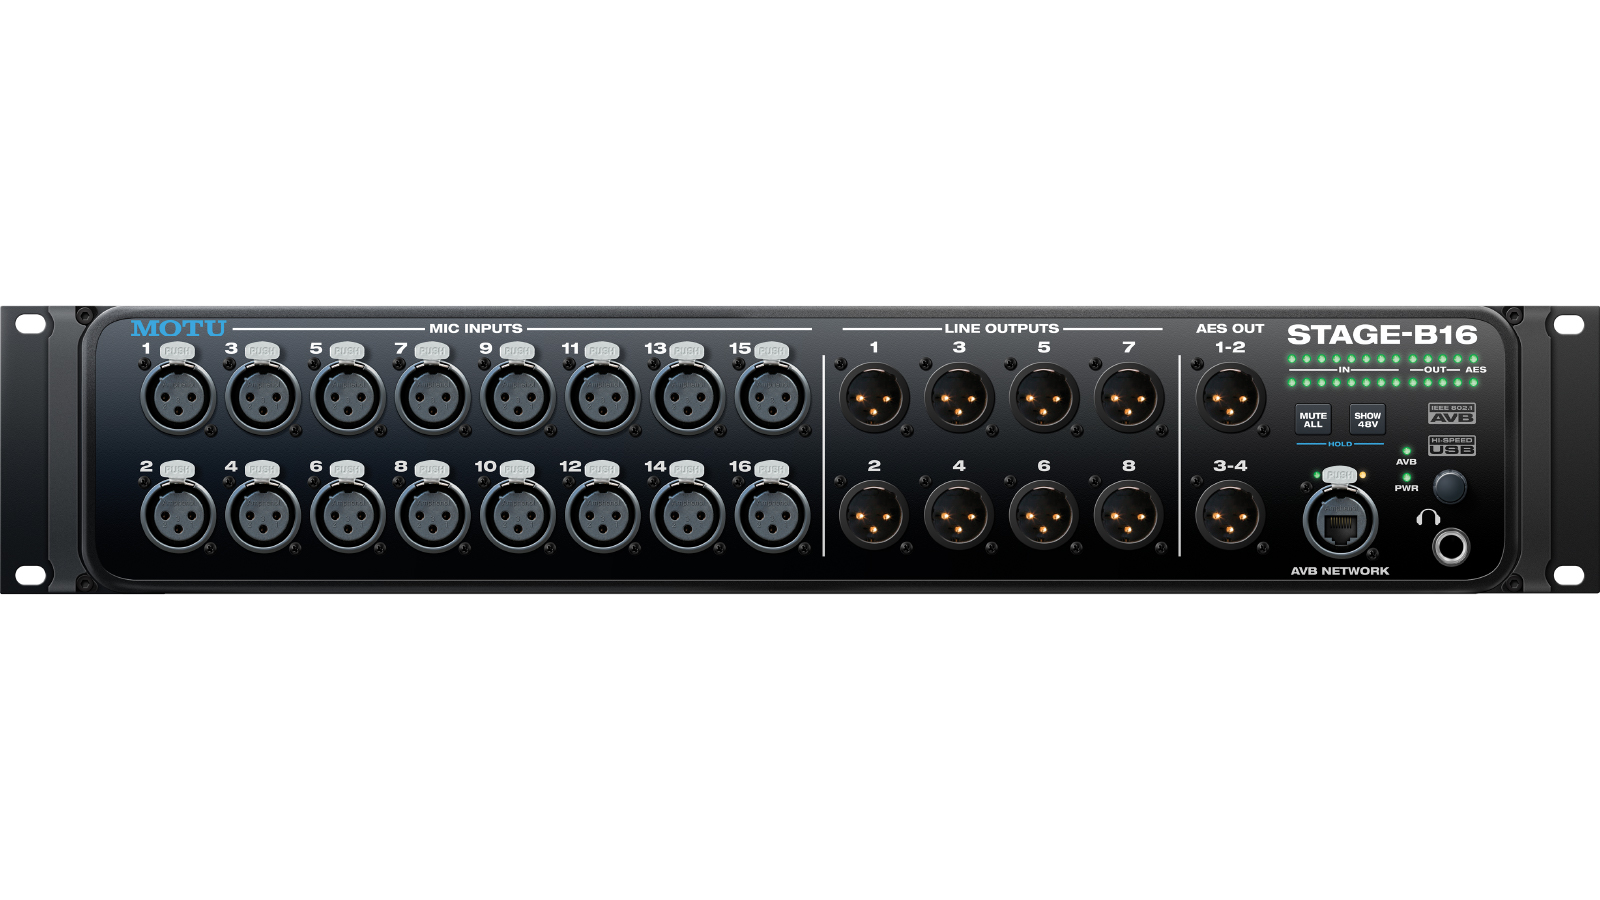 16x12 stage box / mixer / interface with DSP & AVB-TSN networking